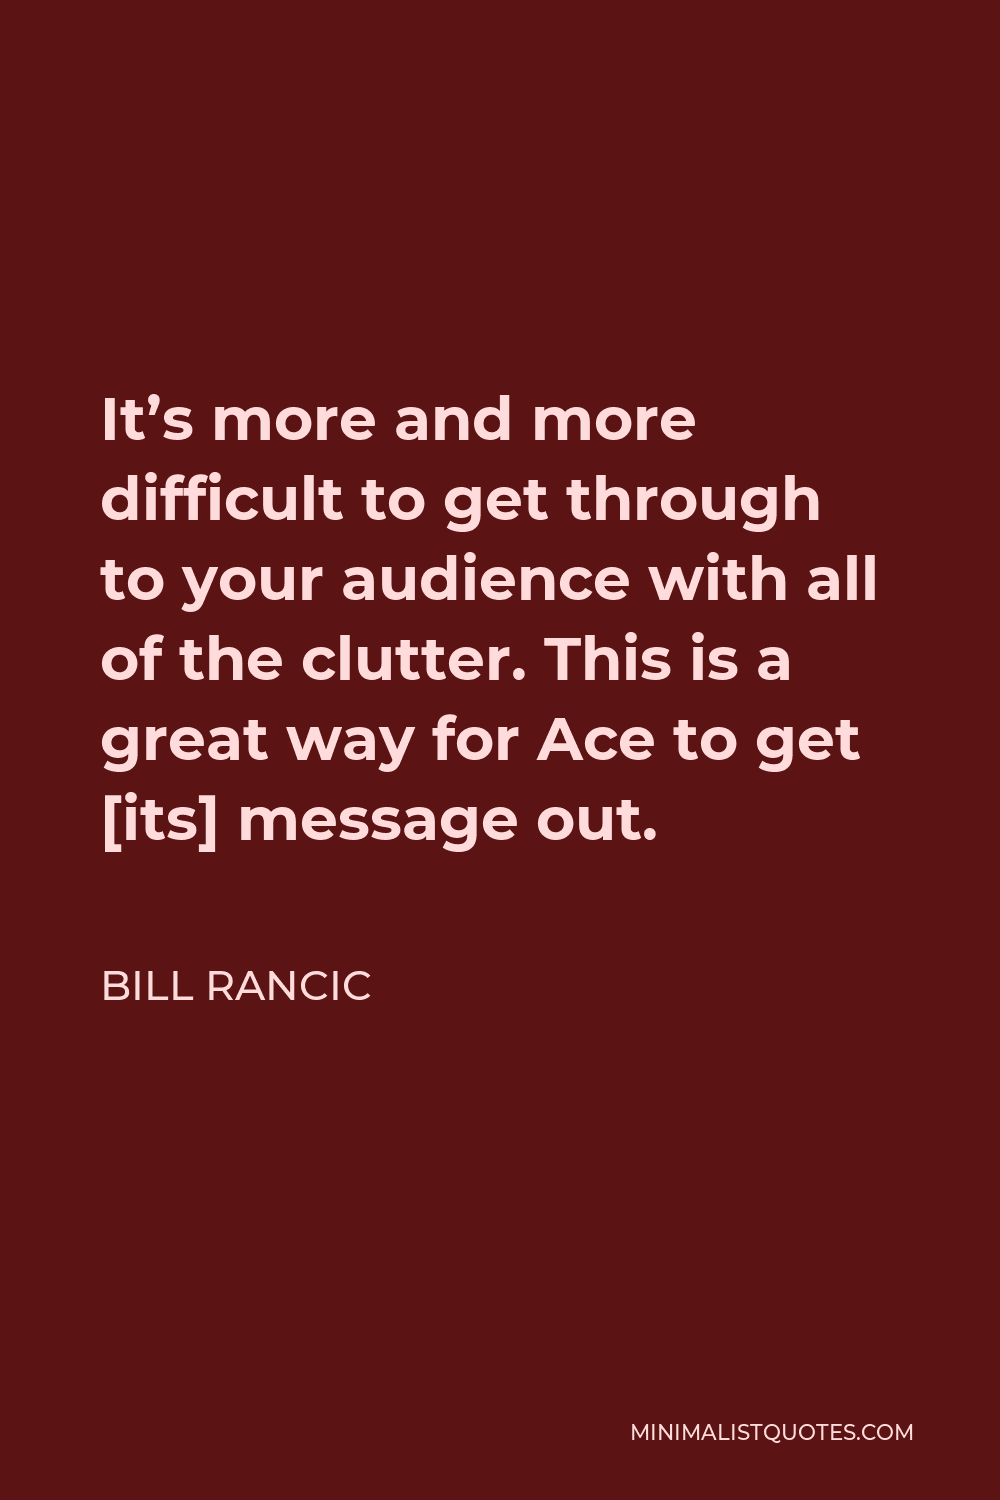 Bill Rancic Quote - It’s more and more difficult to get through to your audience with all of the clutter. This is a great way for Ace to get [its] message out.